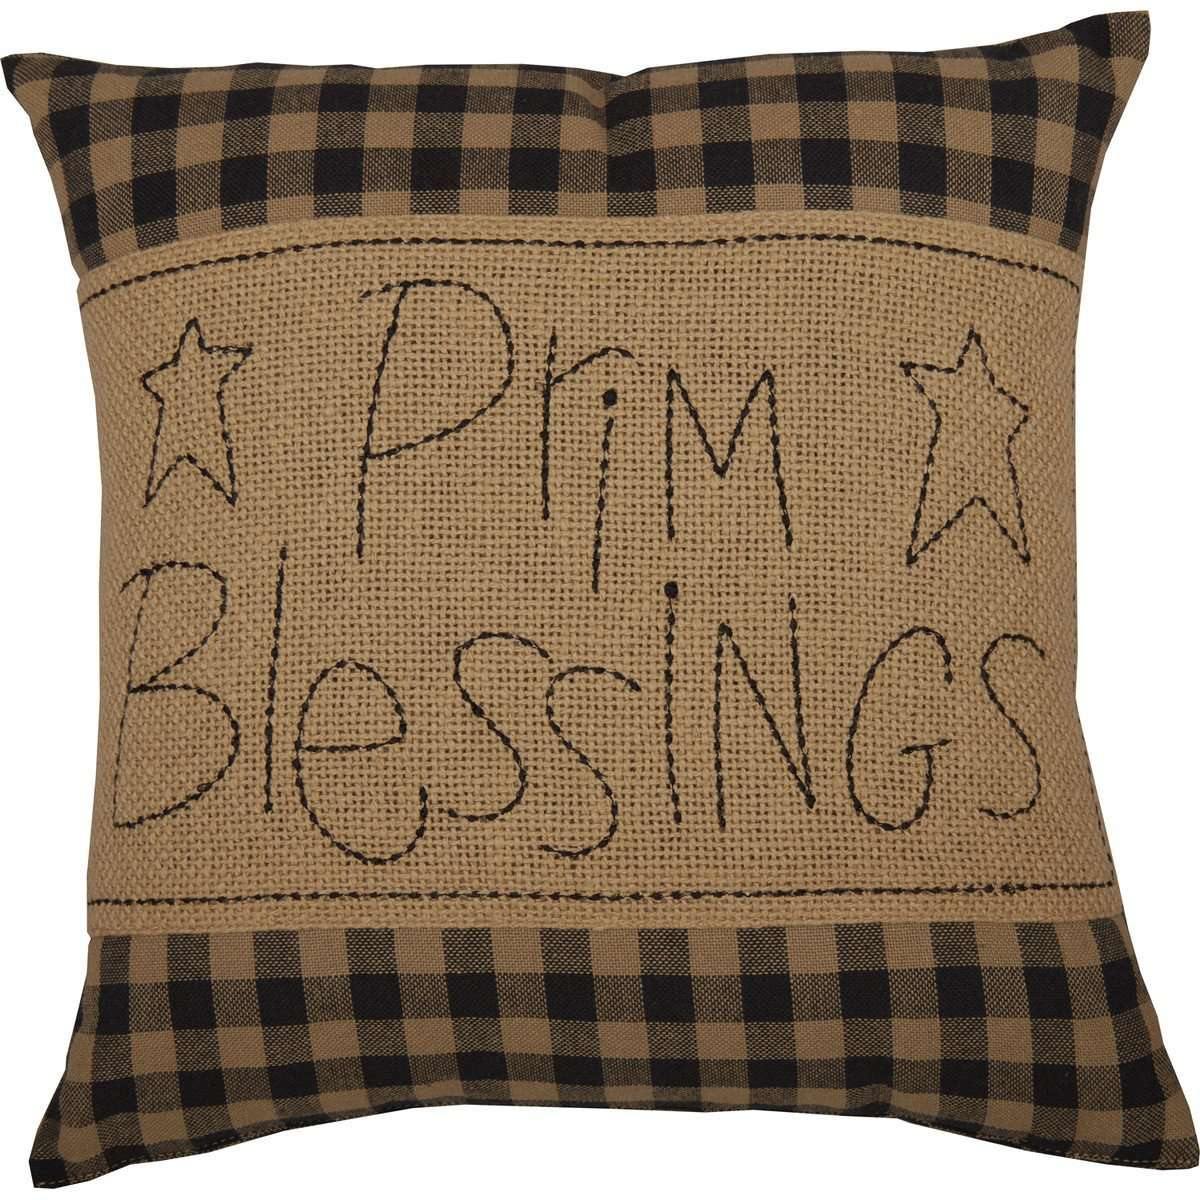 Black Check Prim Blessings Pillow 12x12 VHC Brands front